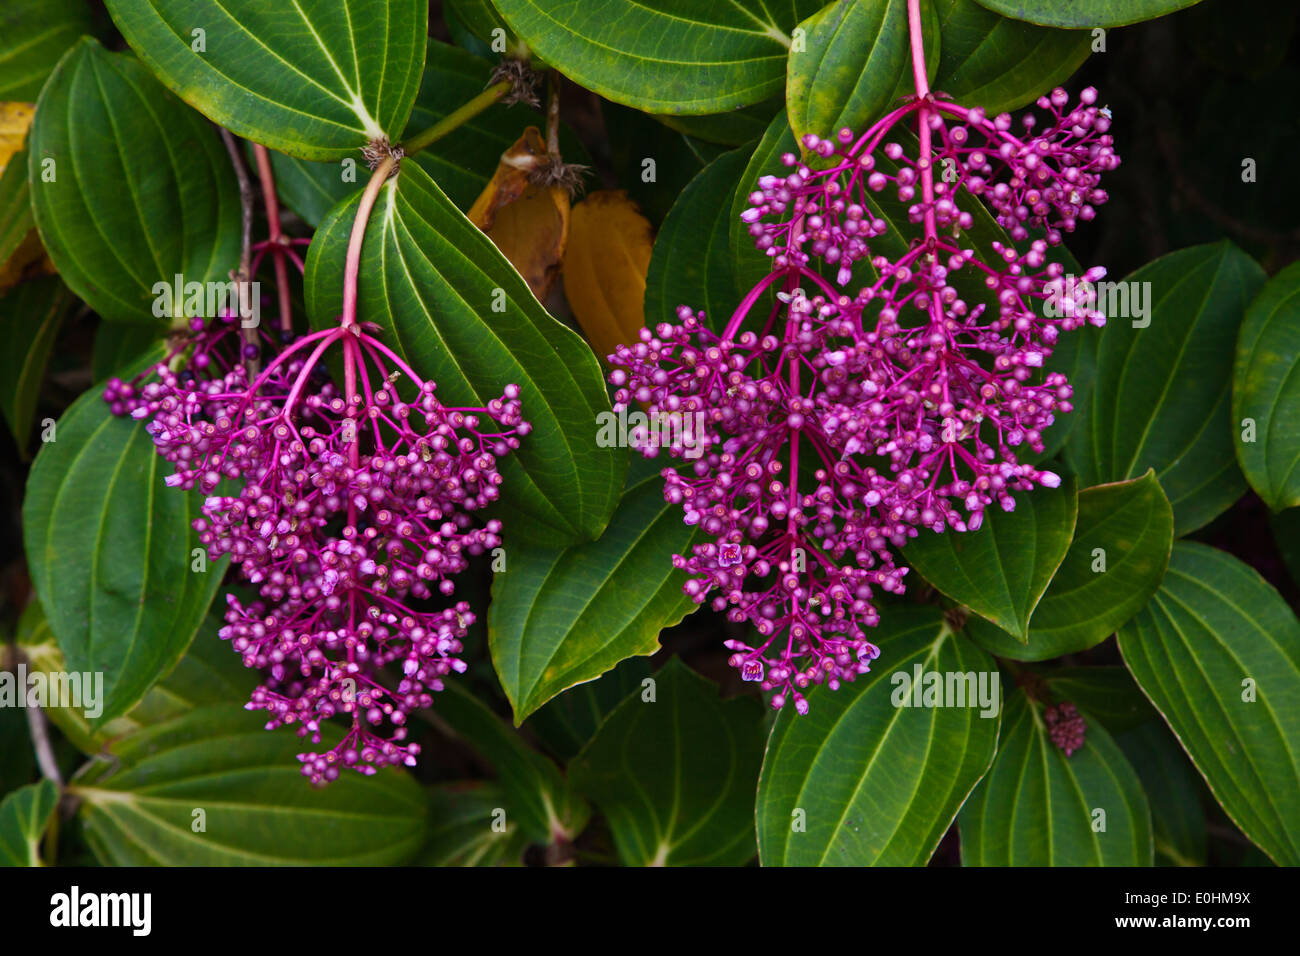 The flower of the PINK MAIDEN (Medinilla speciosa) in the KINABALU NATIONAL PARK - SABAH, BORNEO Stock Photo